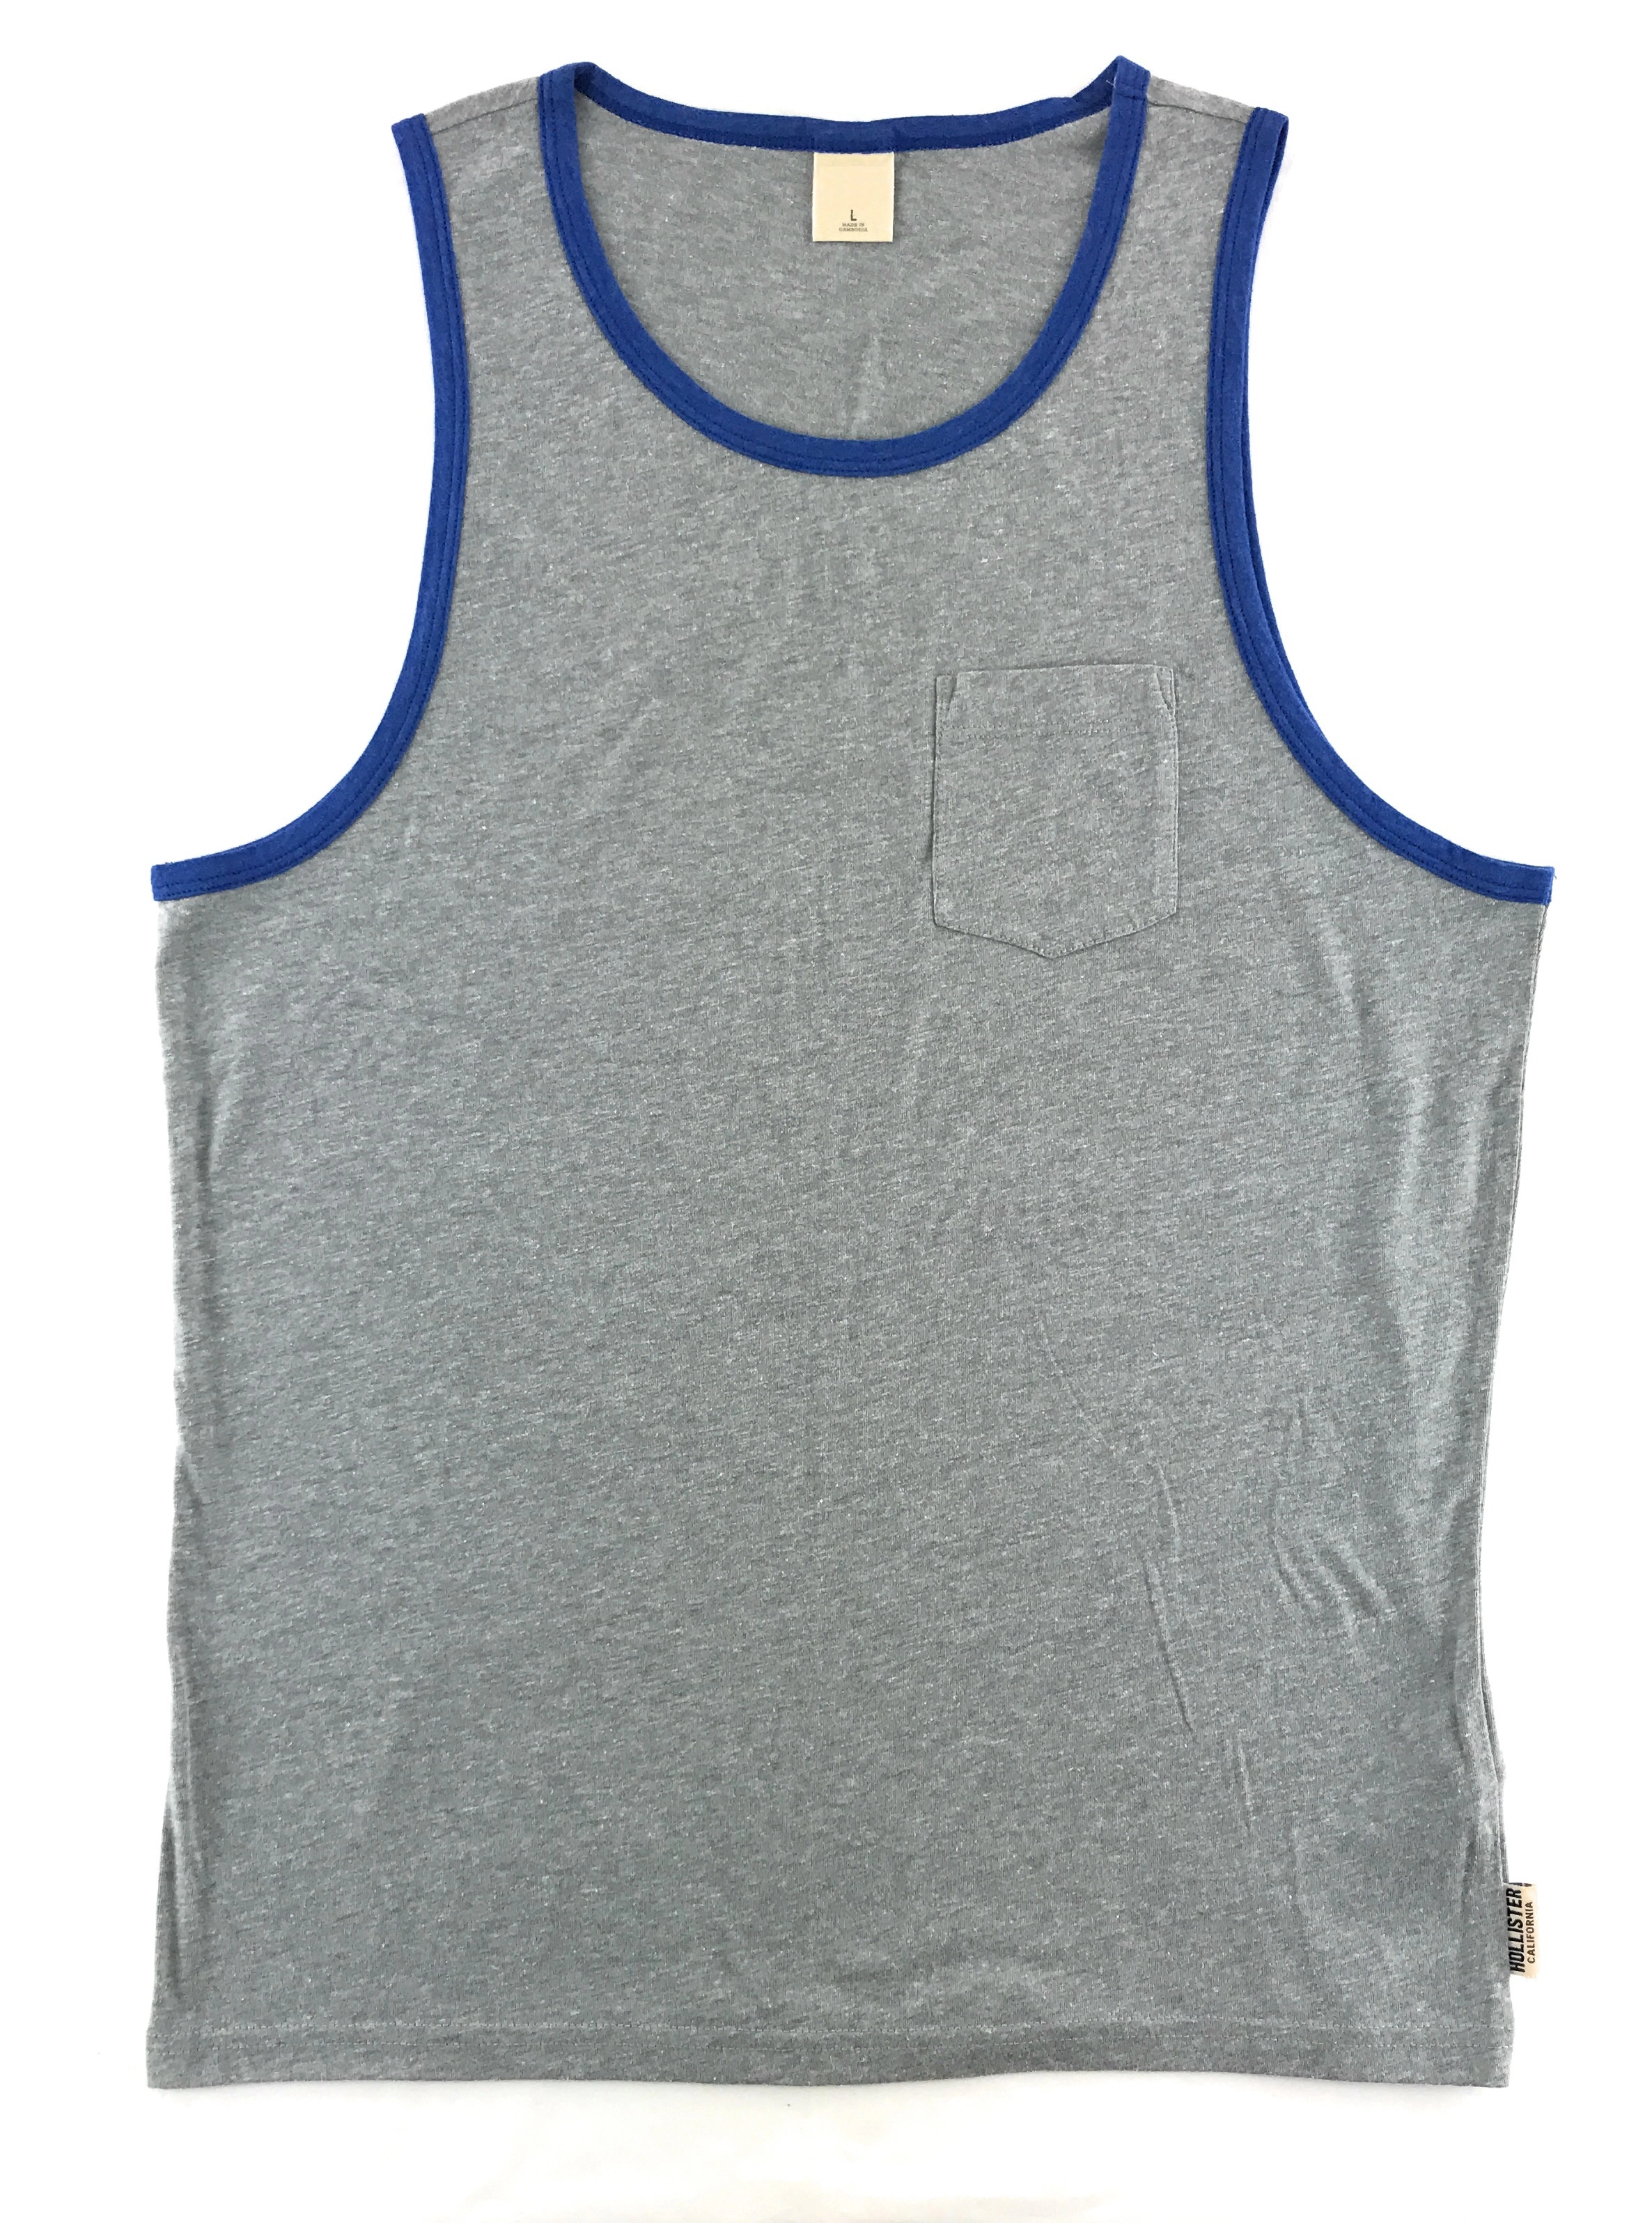 Contrast Piping 100% Cotton Mens Tank Top